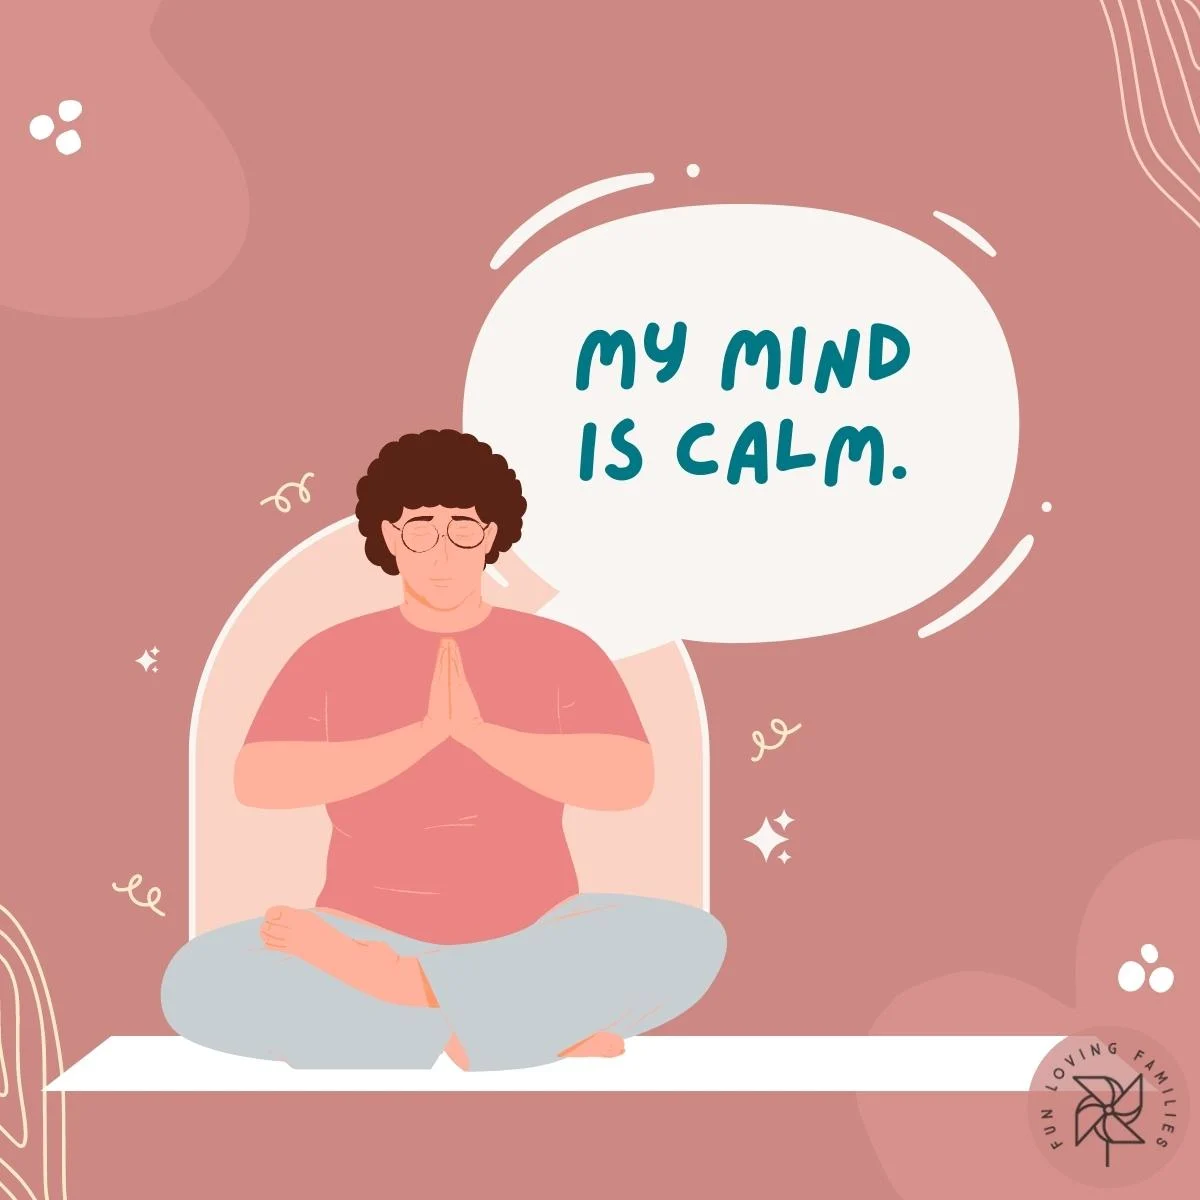 My mind is calm affirmation